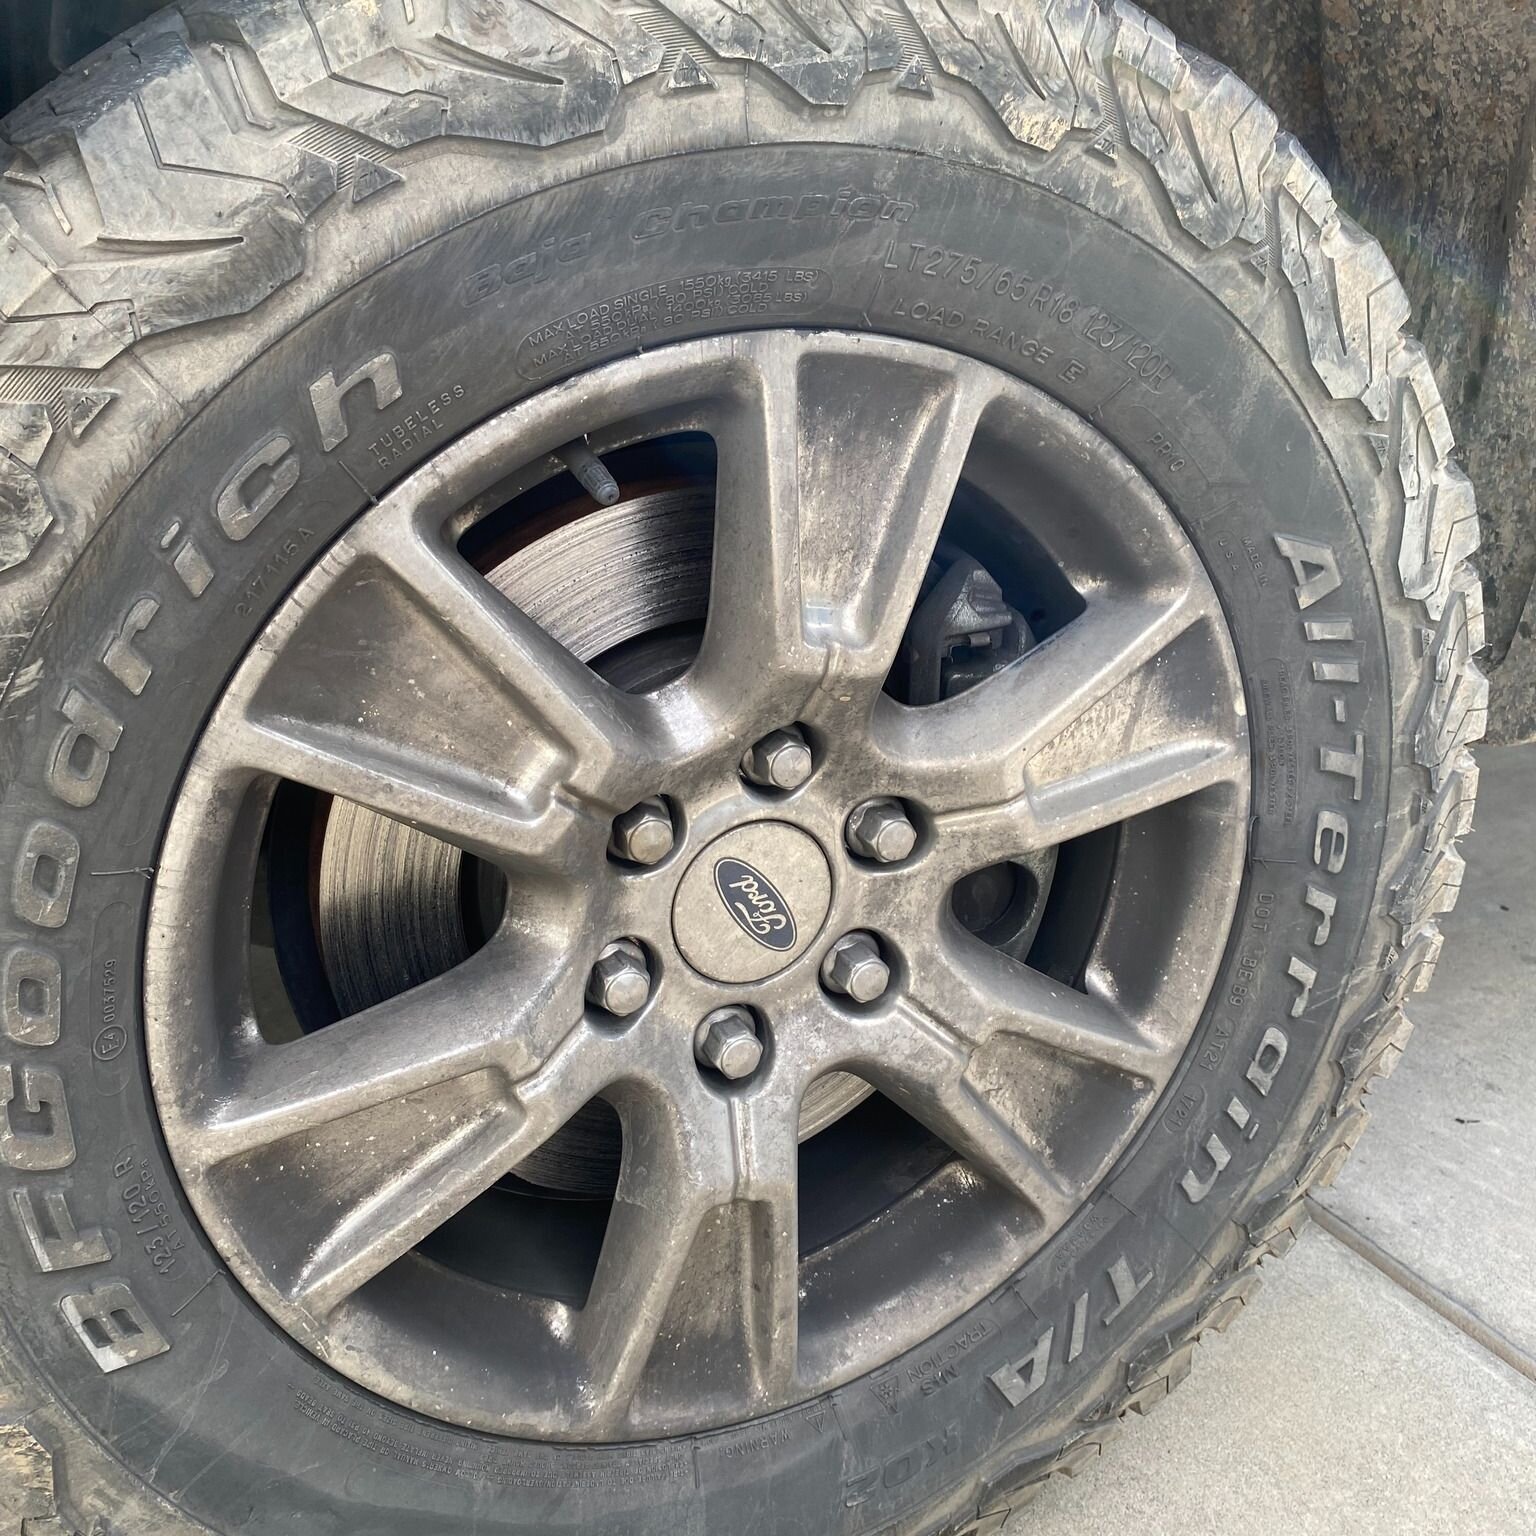 If you let brake dust build up on your rims over time it will deteriorate the clear coat and oxidize the metal. It is much easier to clean them regularly or wait for a dramatic before and after shot. #detailing #mobiledetailing #nicksmobiledetailing 